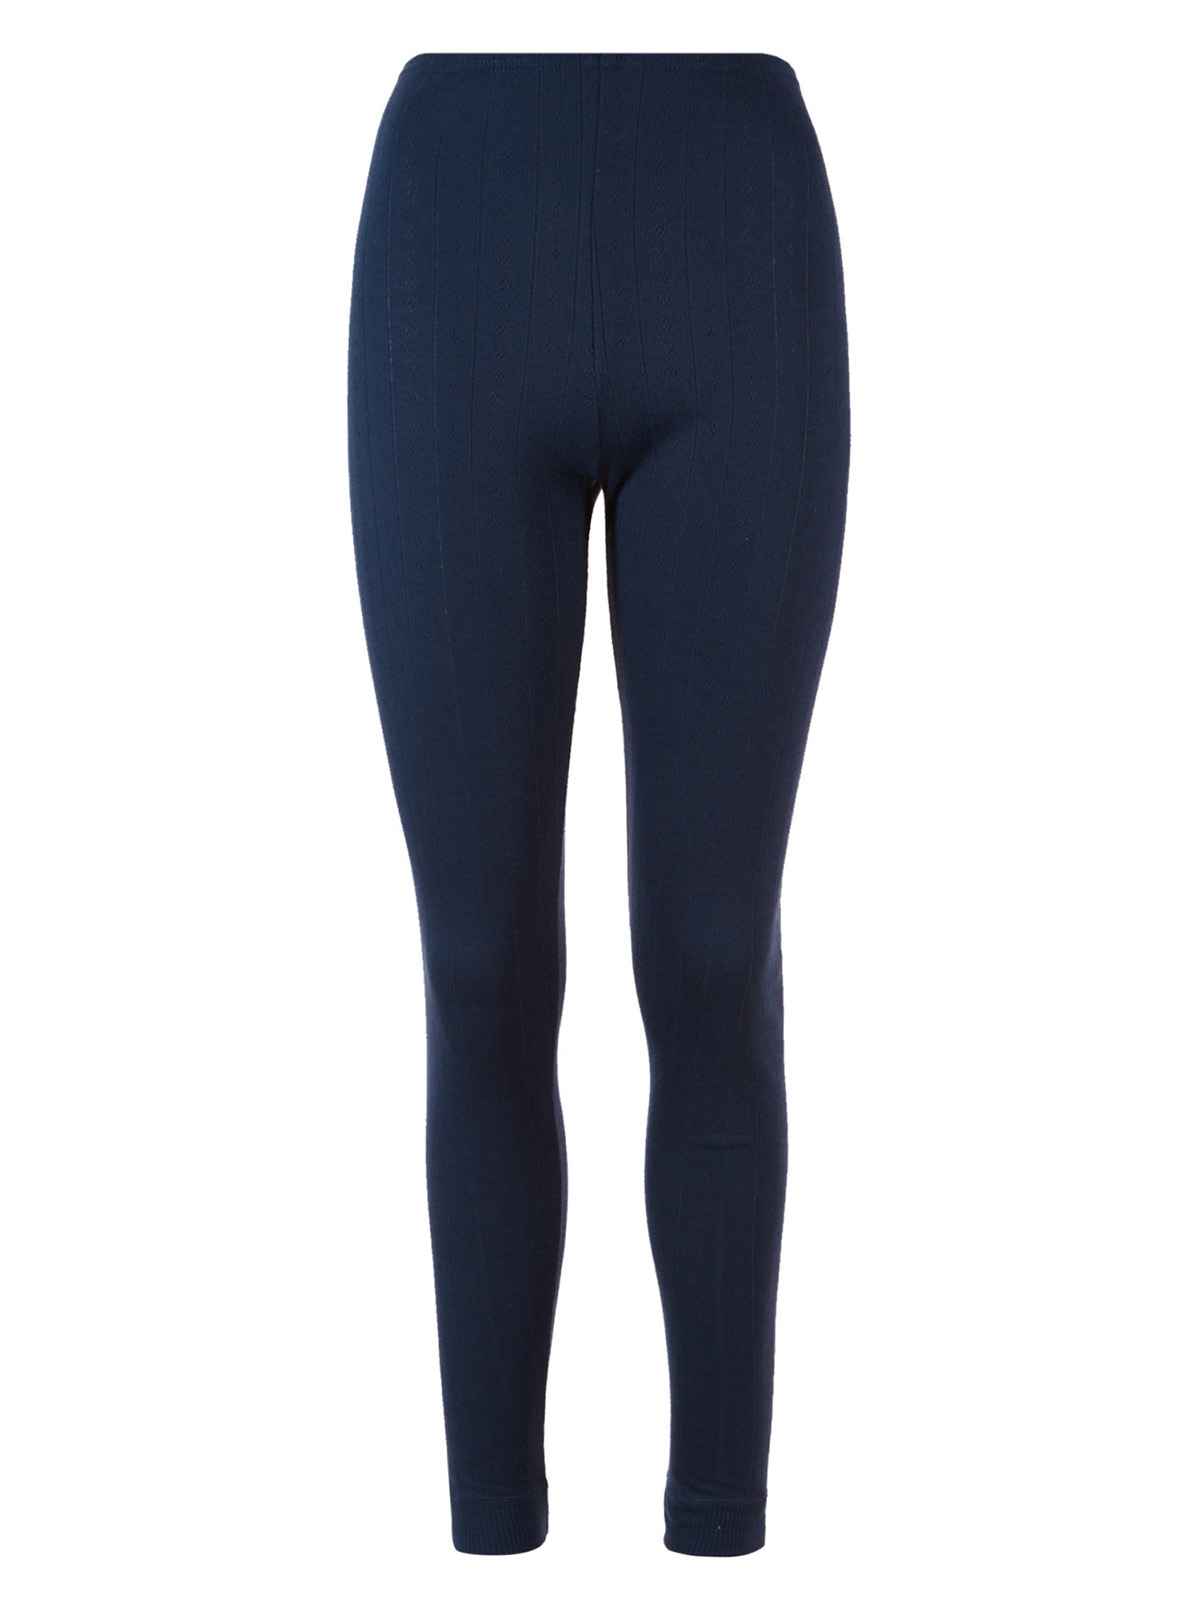 Marks and Spencer - - M&5 NAVY Thermal Ankle Length Leggings - Size 6 to 22